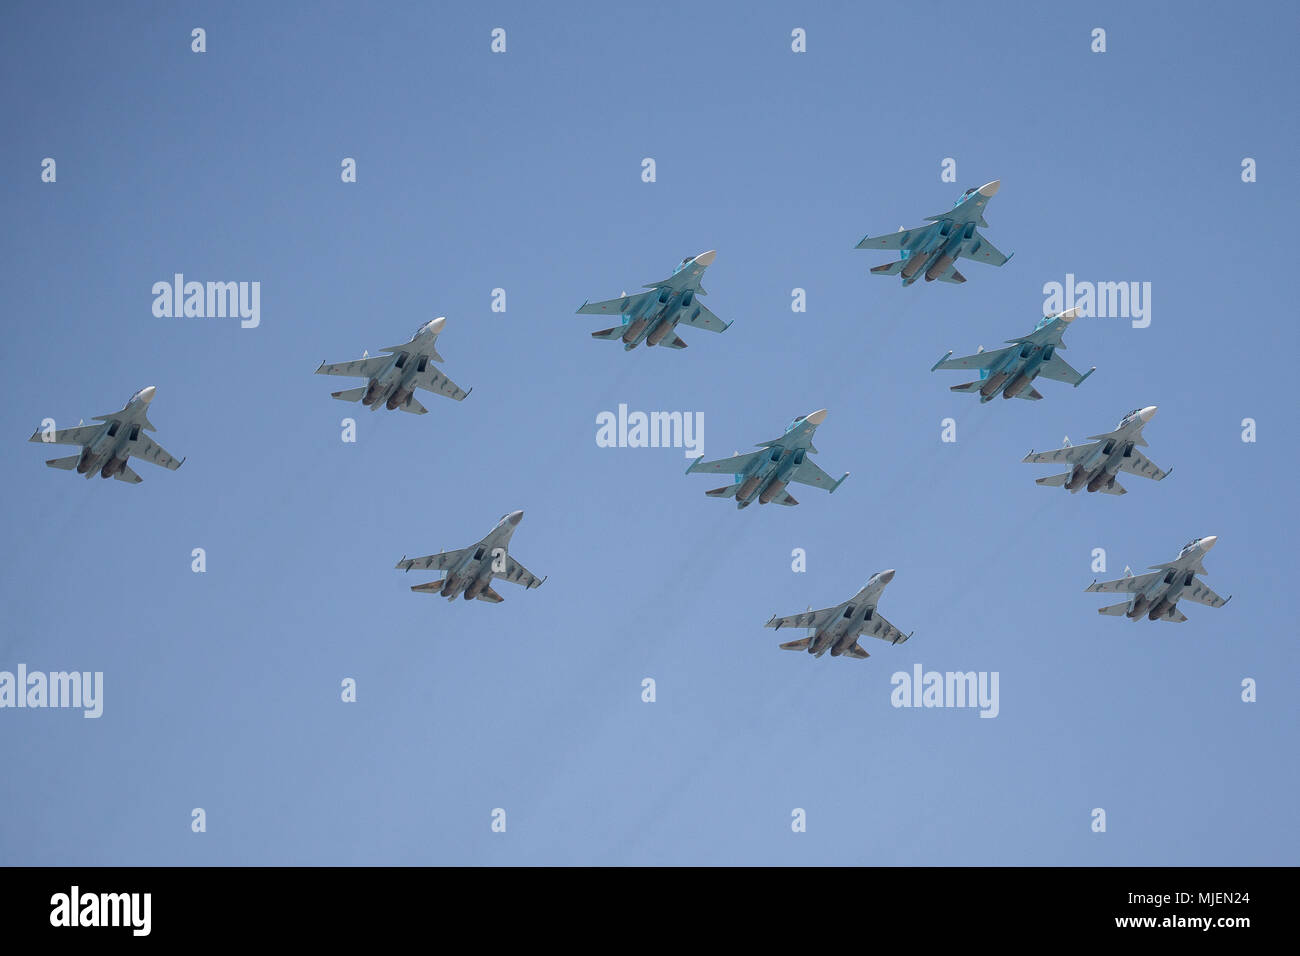 Moscow, Russia. 4th May, 2018. Russian Air Force multi-purpose fighters Sukhoi Su-34, Sukhoi-Su35S, Sukhoi Su-30SM and Sukhoi Su-27 aircraft fly in formation during a rehearsal of the upcoming Victory Day air show marking the 73rd anniversary of the victory over Nazi Germany in the 1941-45 Great Patriotic War, the Eastern Front of World War II. Credit: Victor Vytolskiy/Alamy Live News Stock Photo